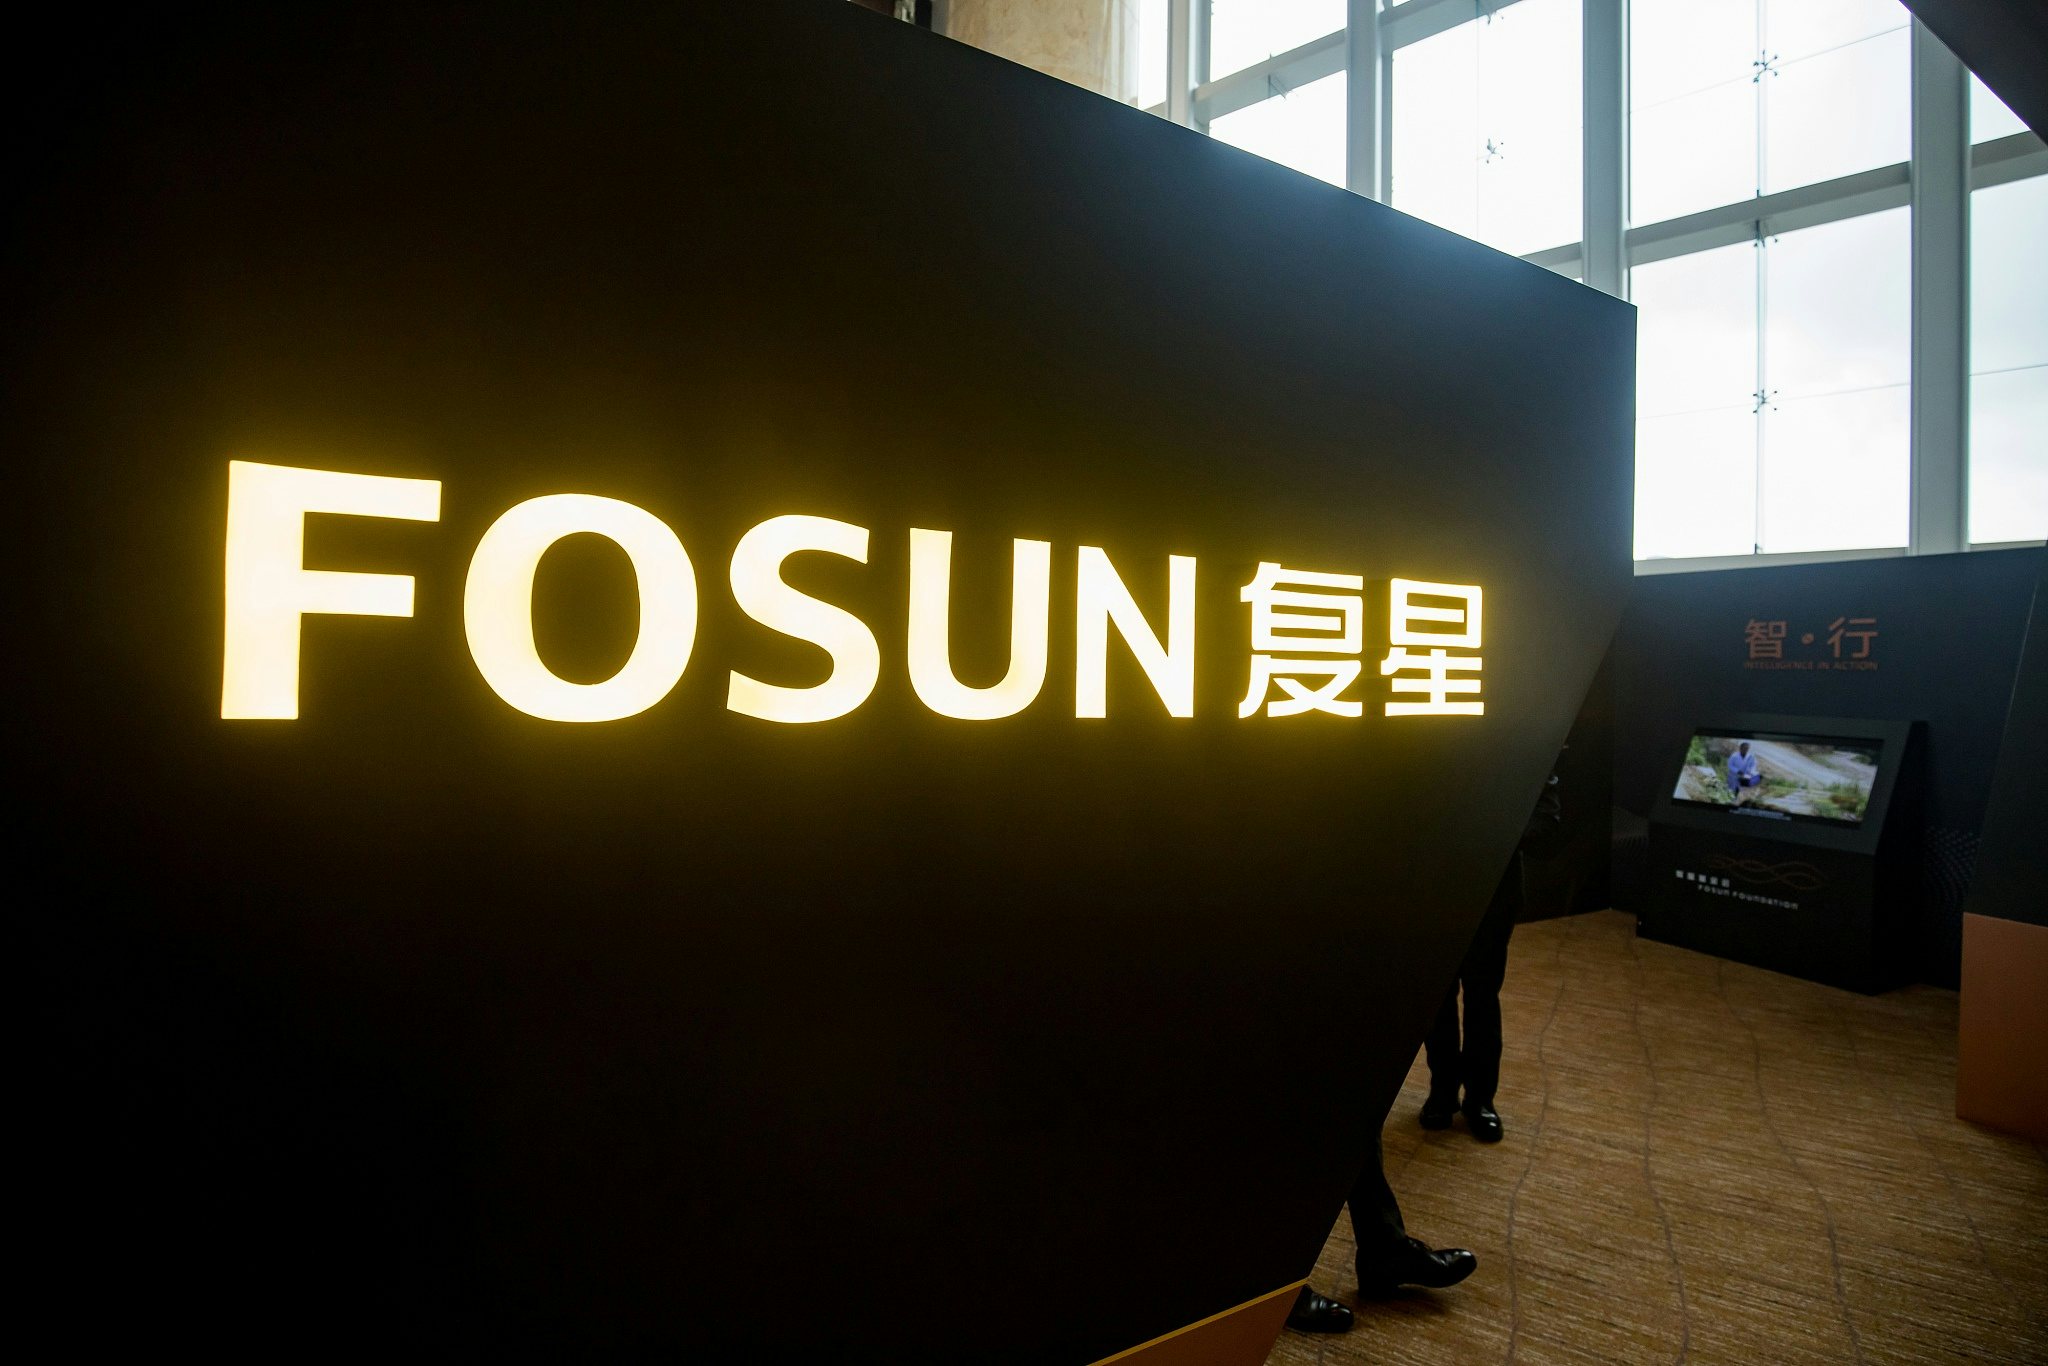 Fosun International Ltd. branding is displayed in an exhibition area during a news conference in Hong Kong, China. Photographer: Paul Yeung/Bloomberg